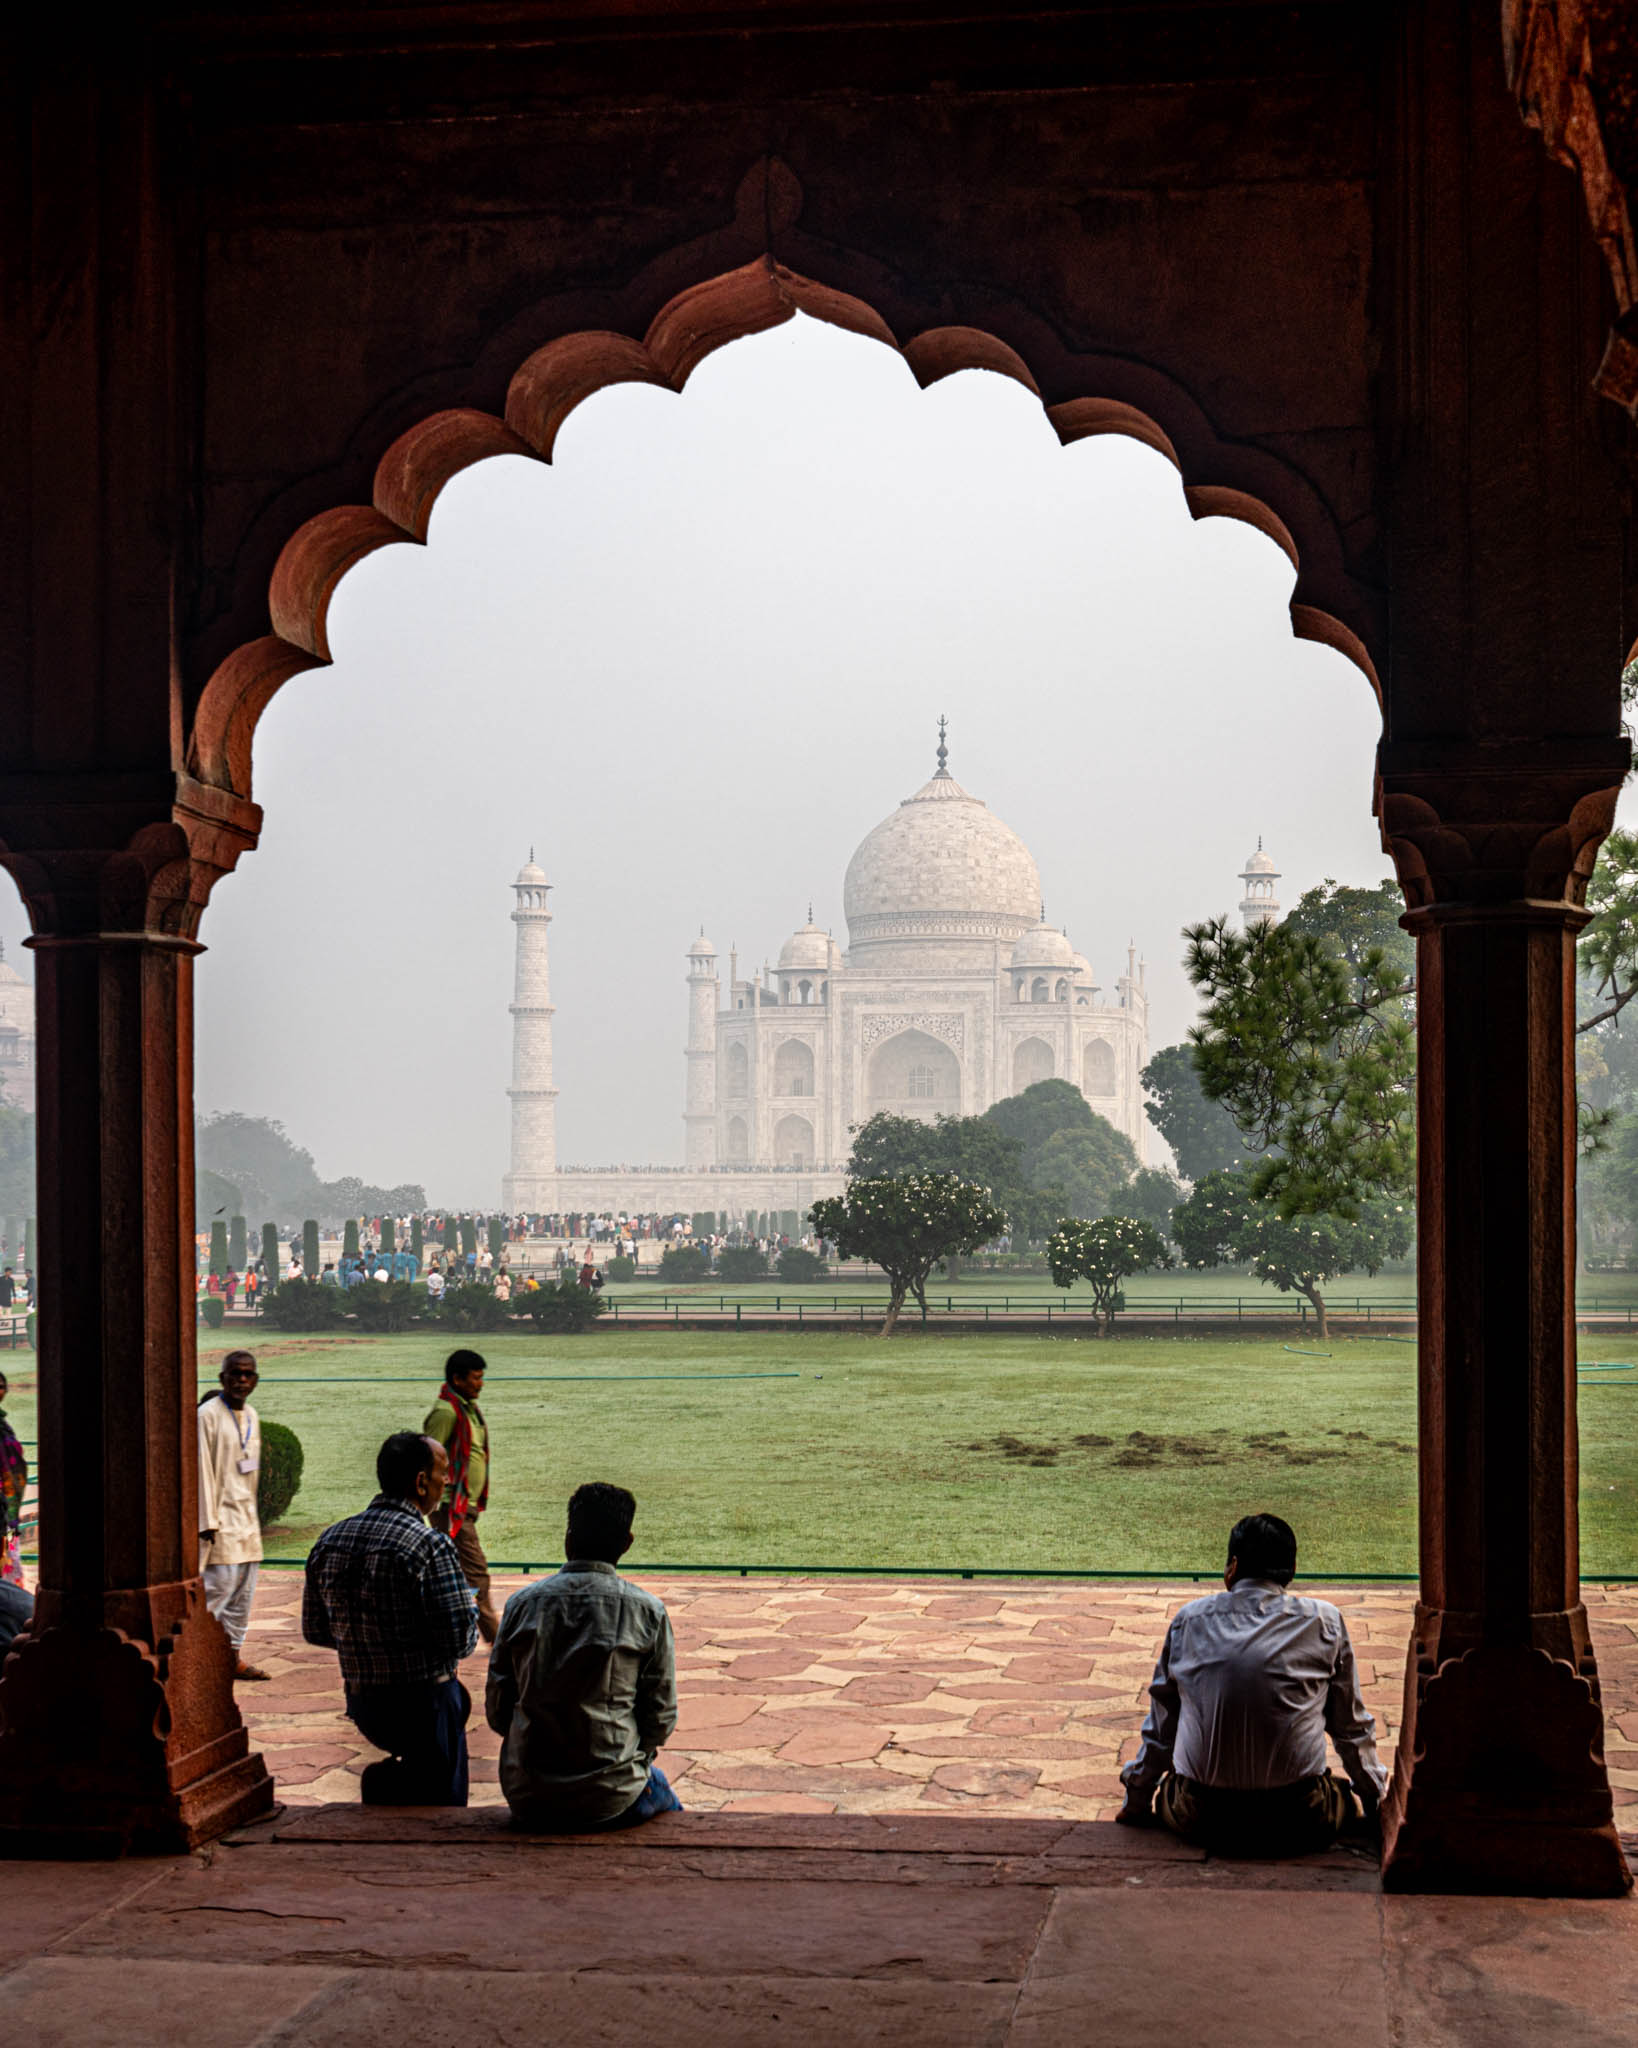 people sitting on a brick walkway looking at a large building with Taj Mahal in the background